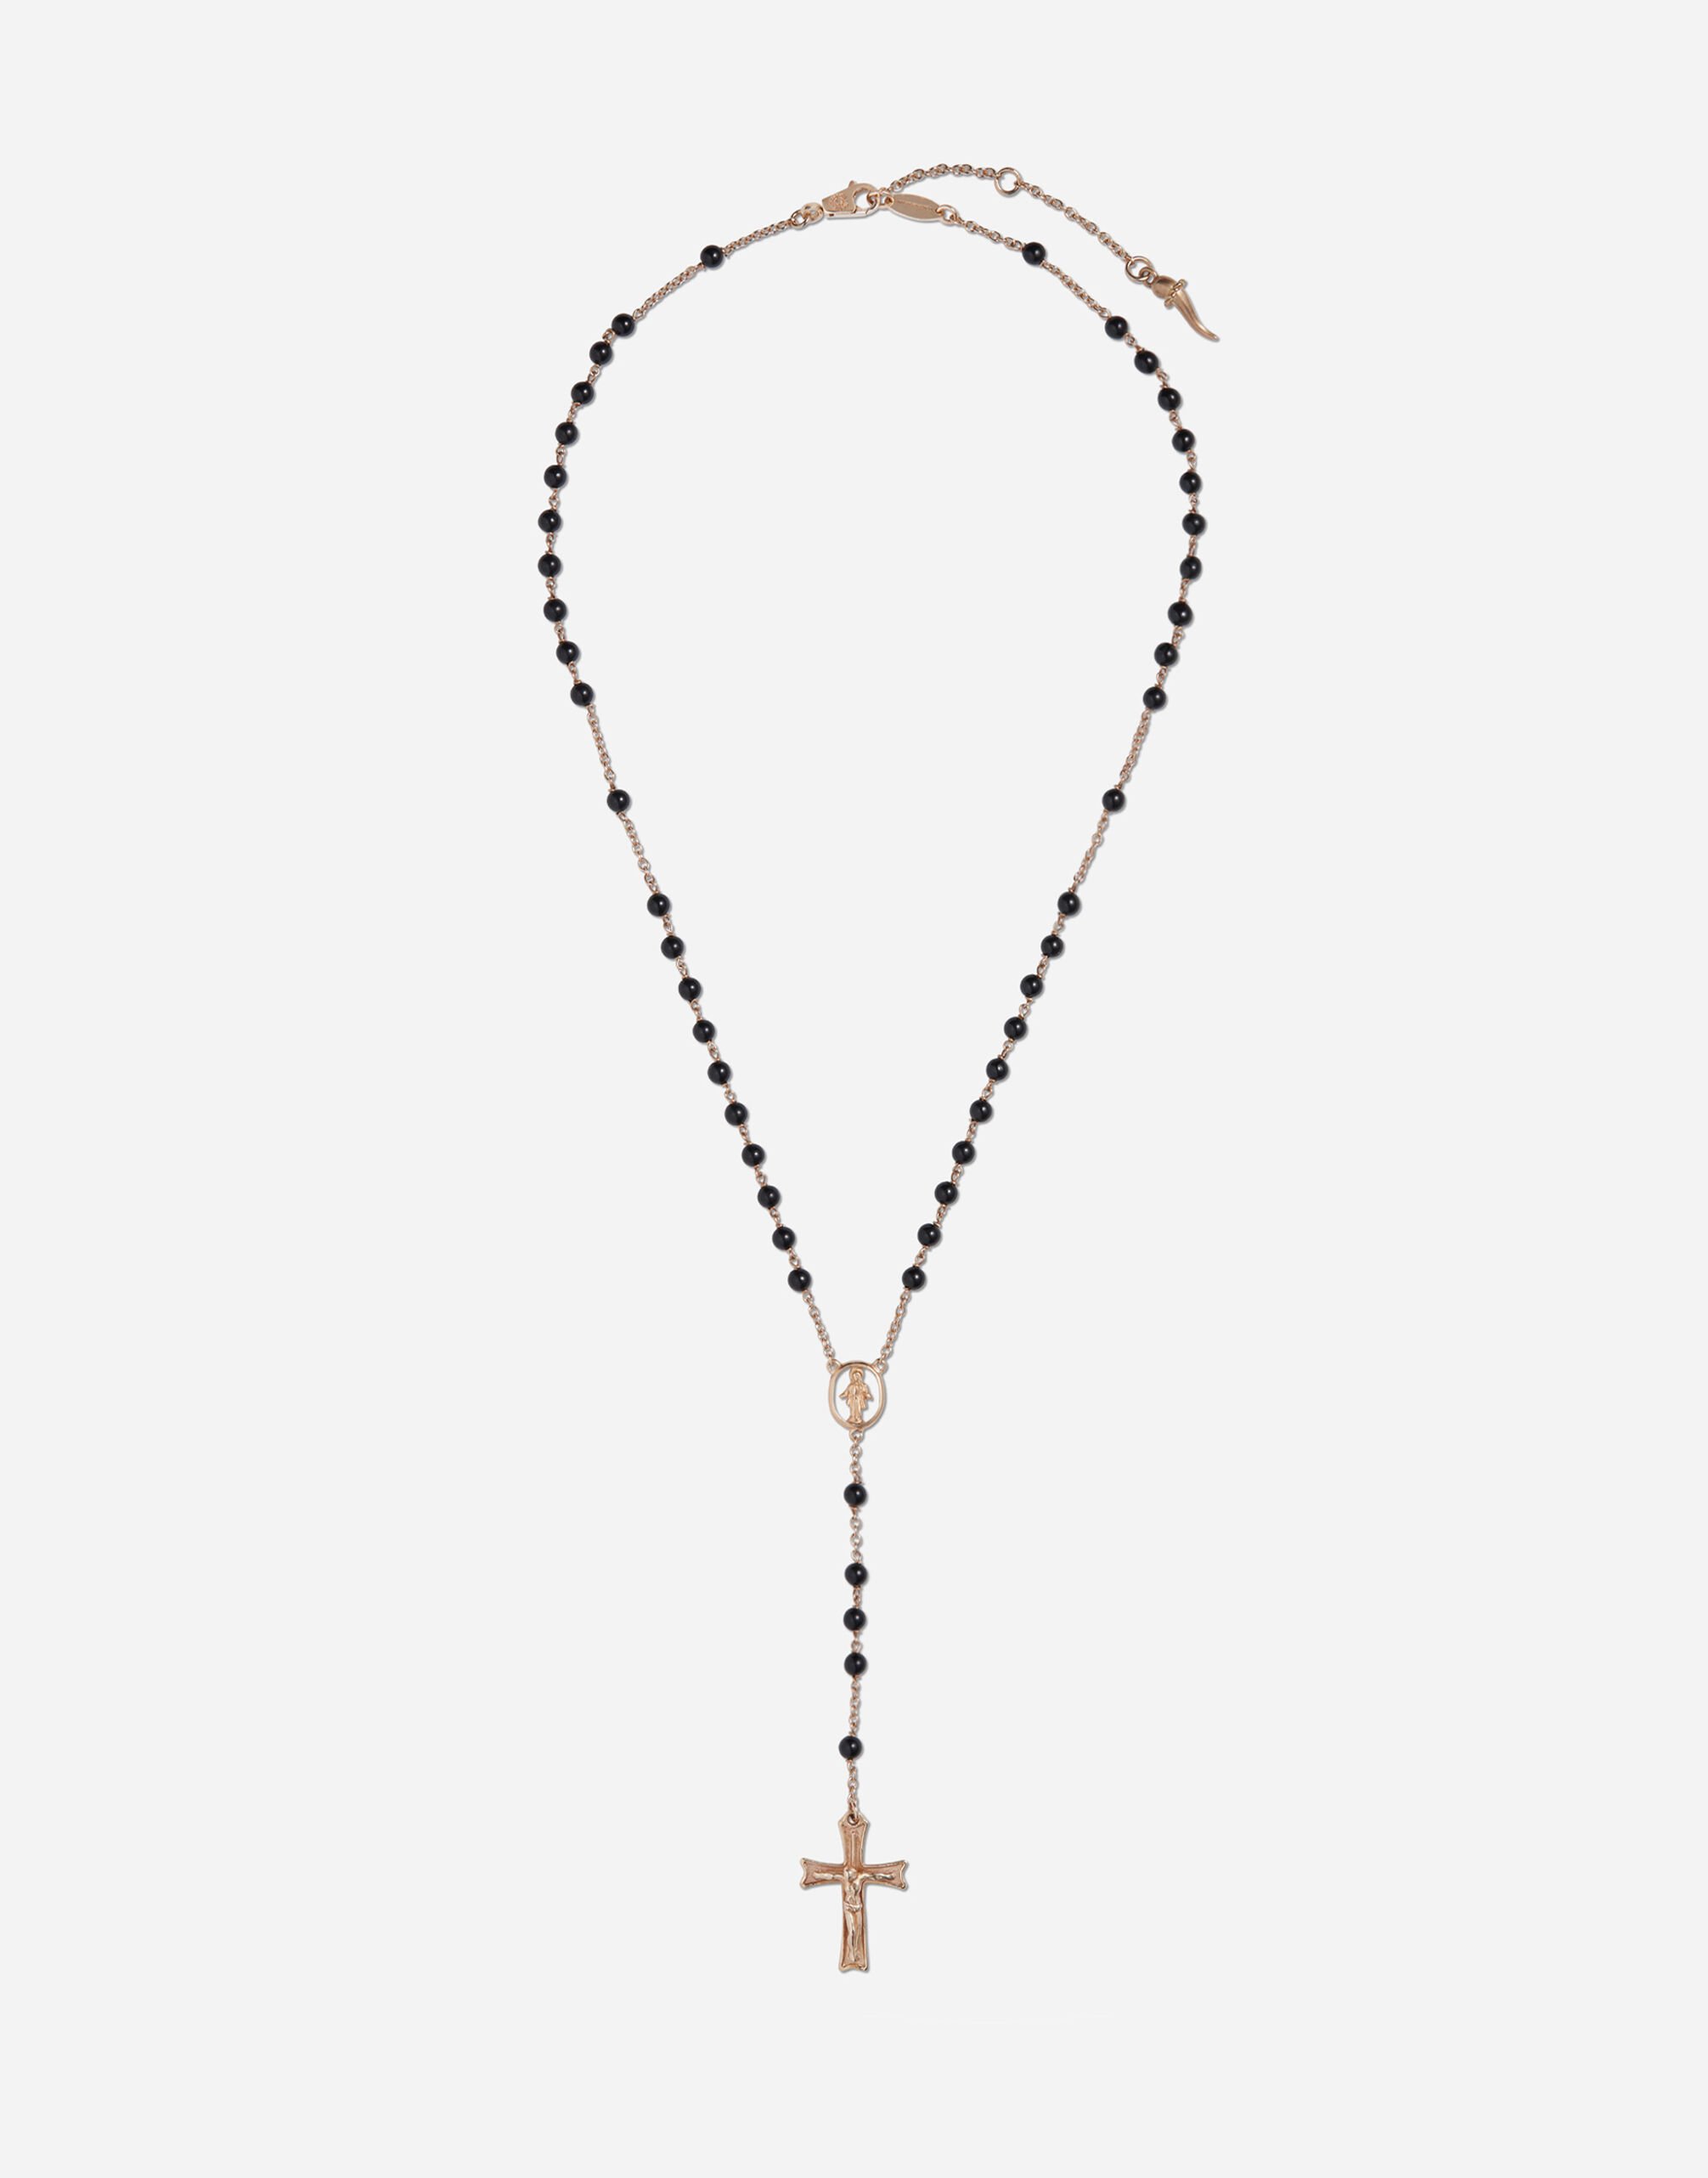 Dolce & Gabbana Yellow gold Devotion rosary necklace with black jade spheres Gold/Black WEDC2GW0001